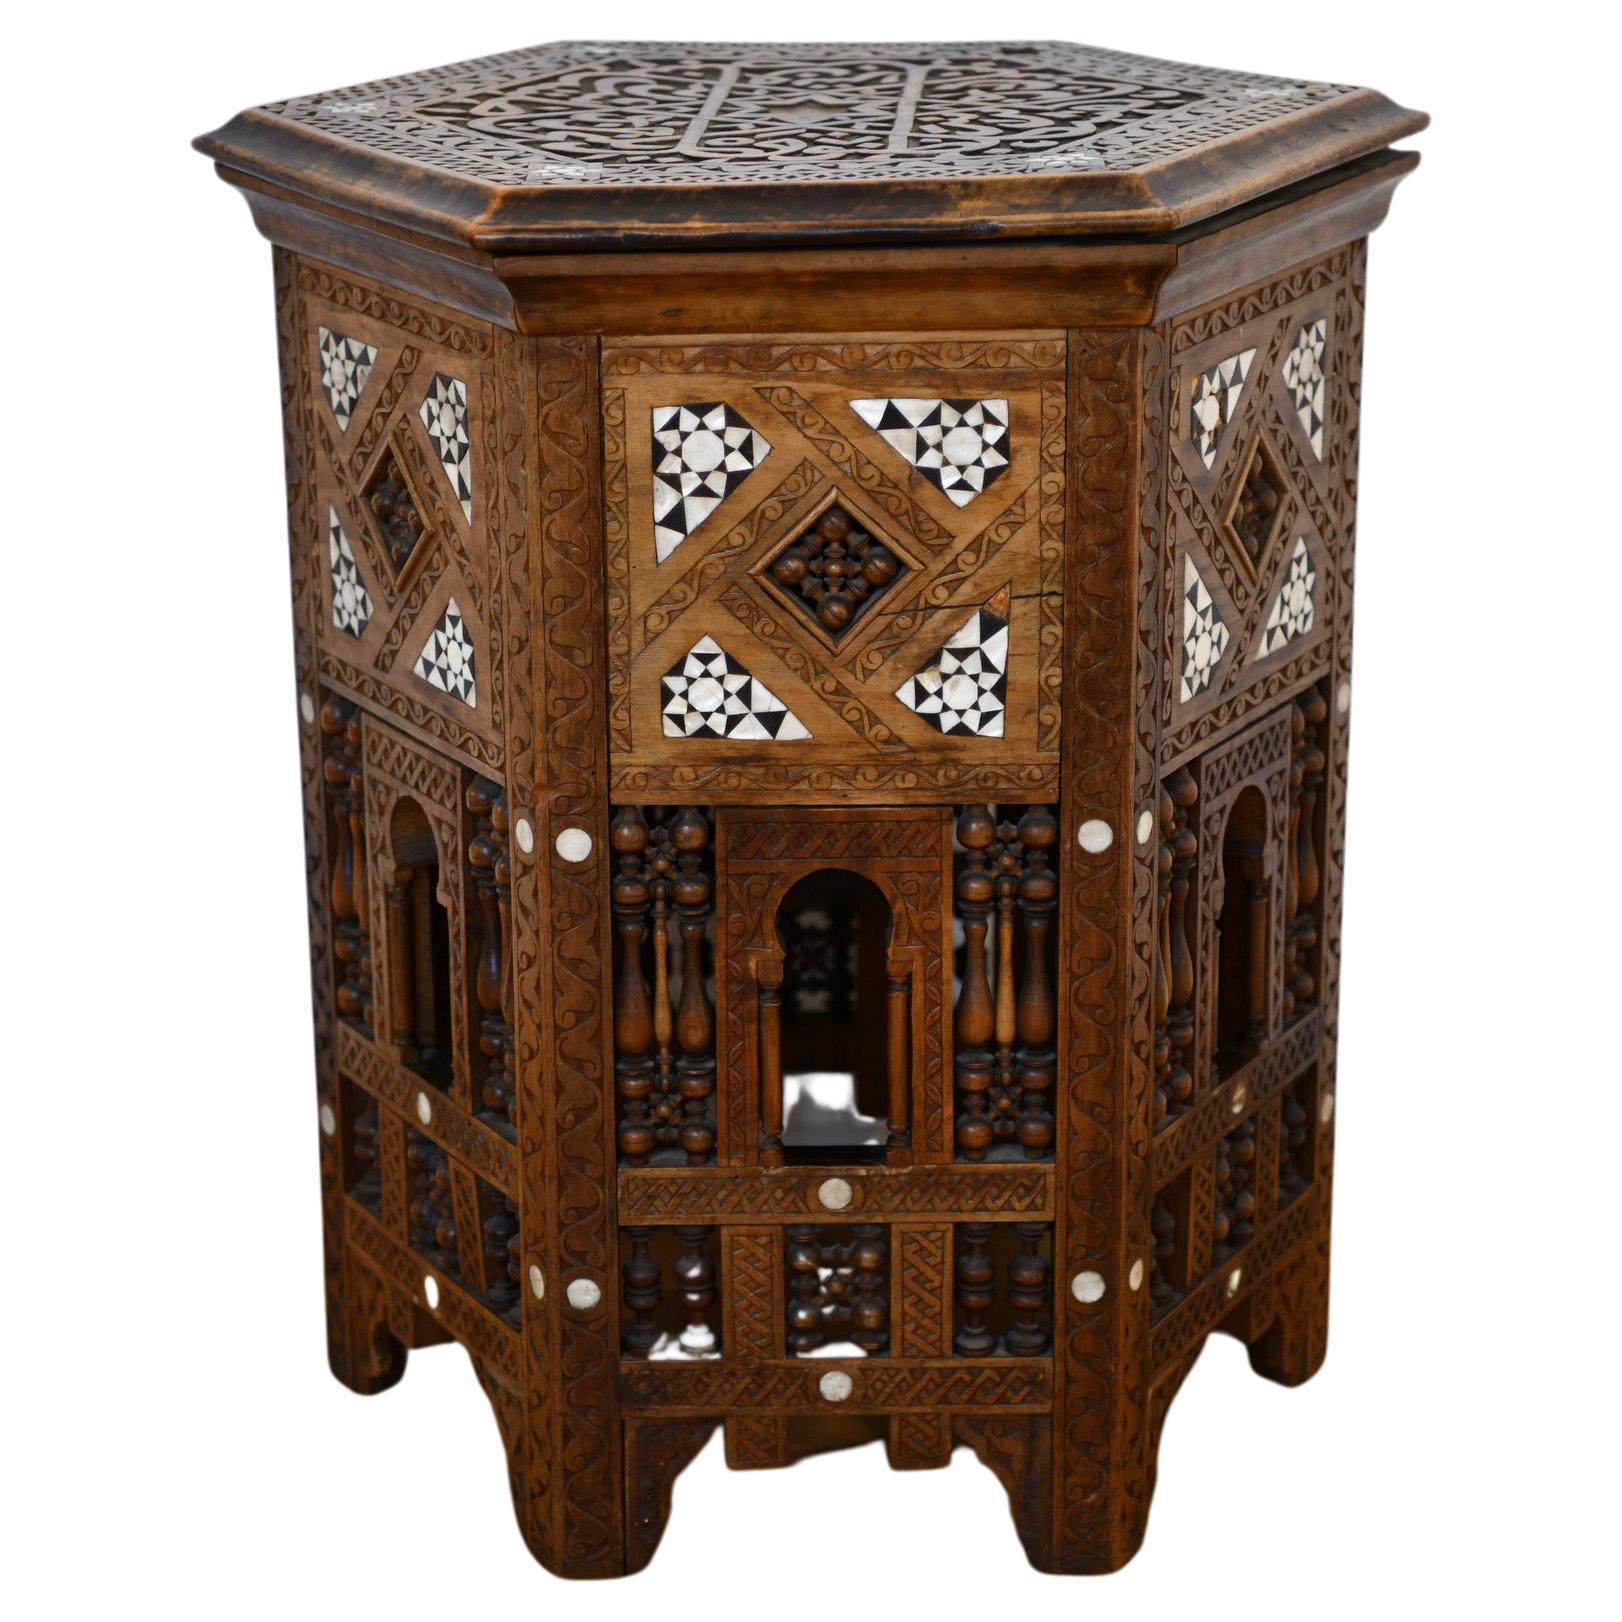 Syrian Tabouret with Mother of Pearl For Sale